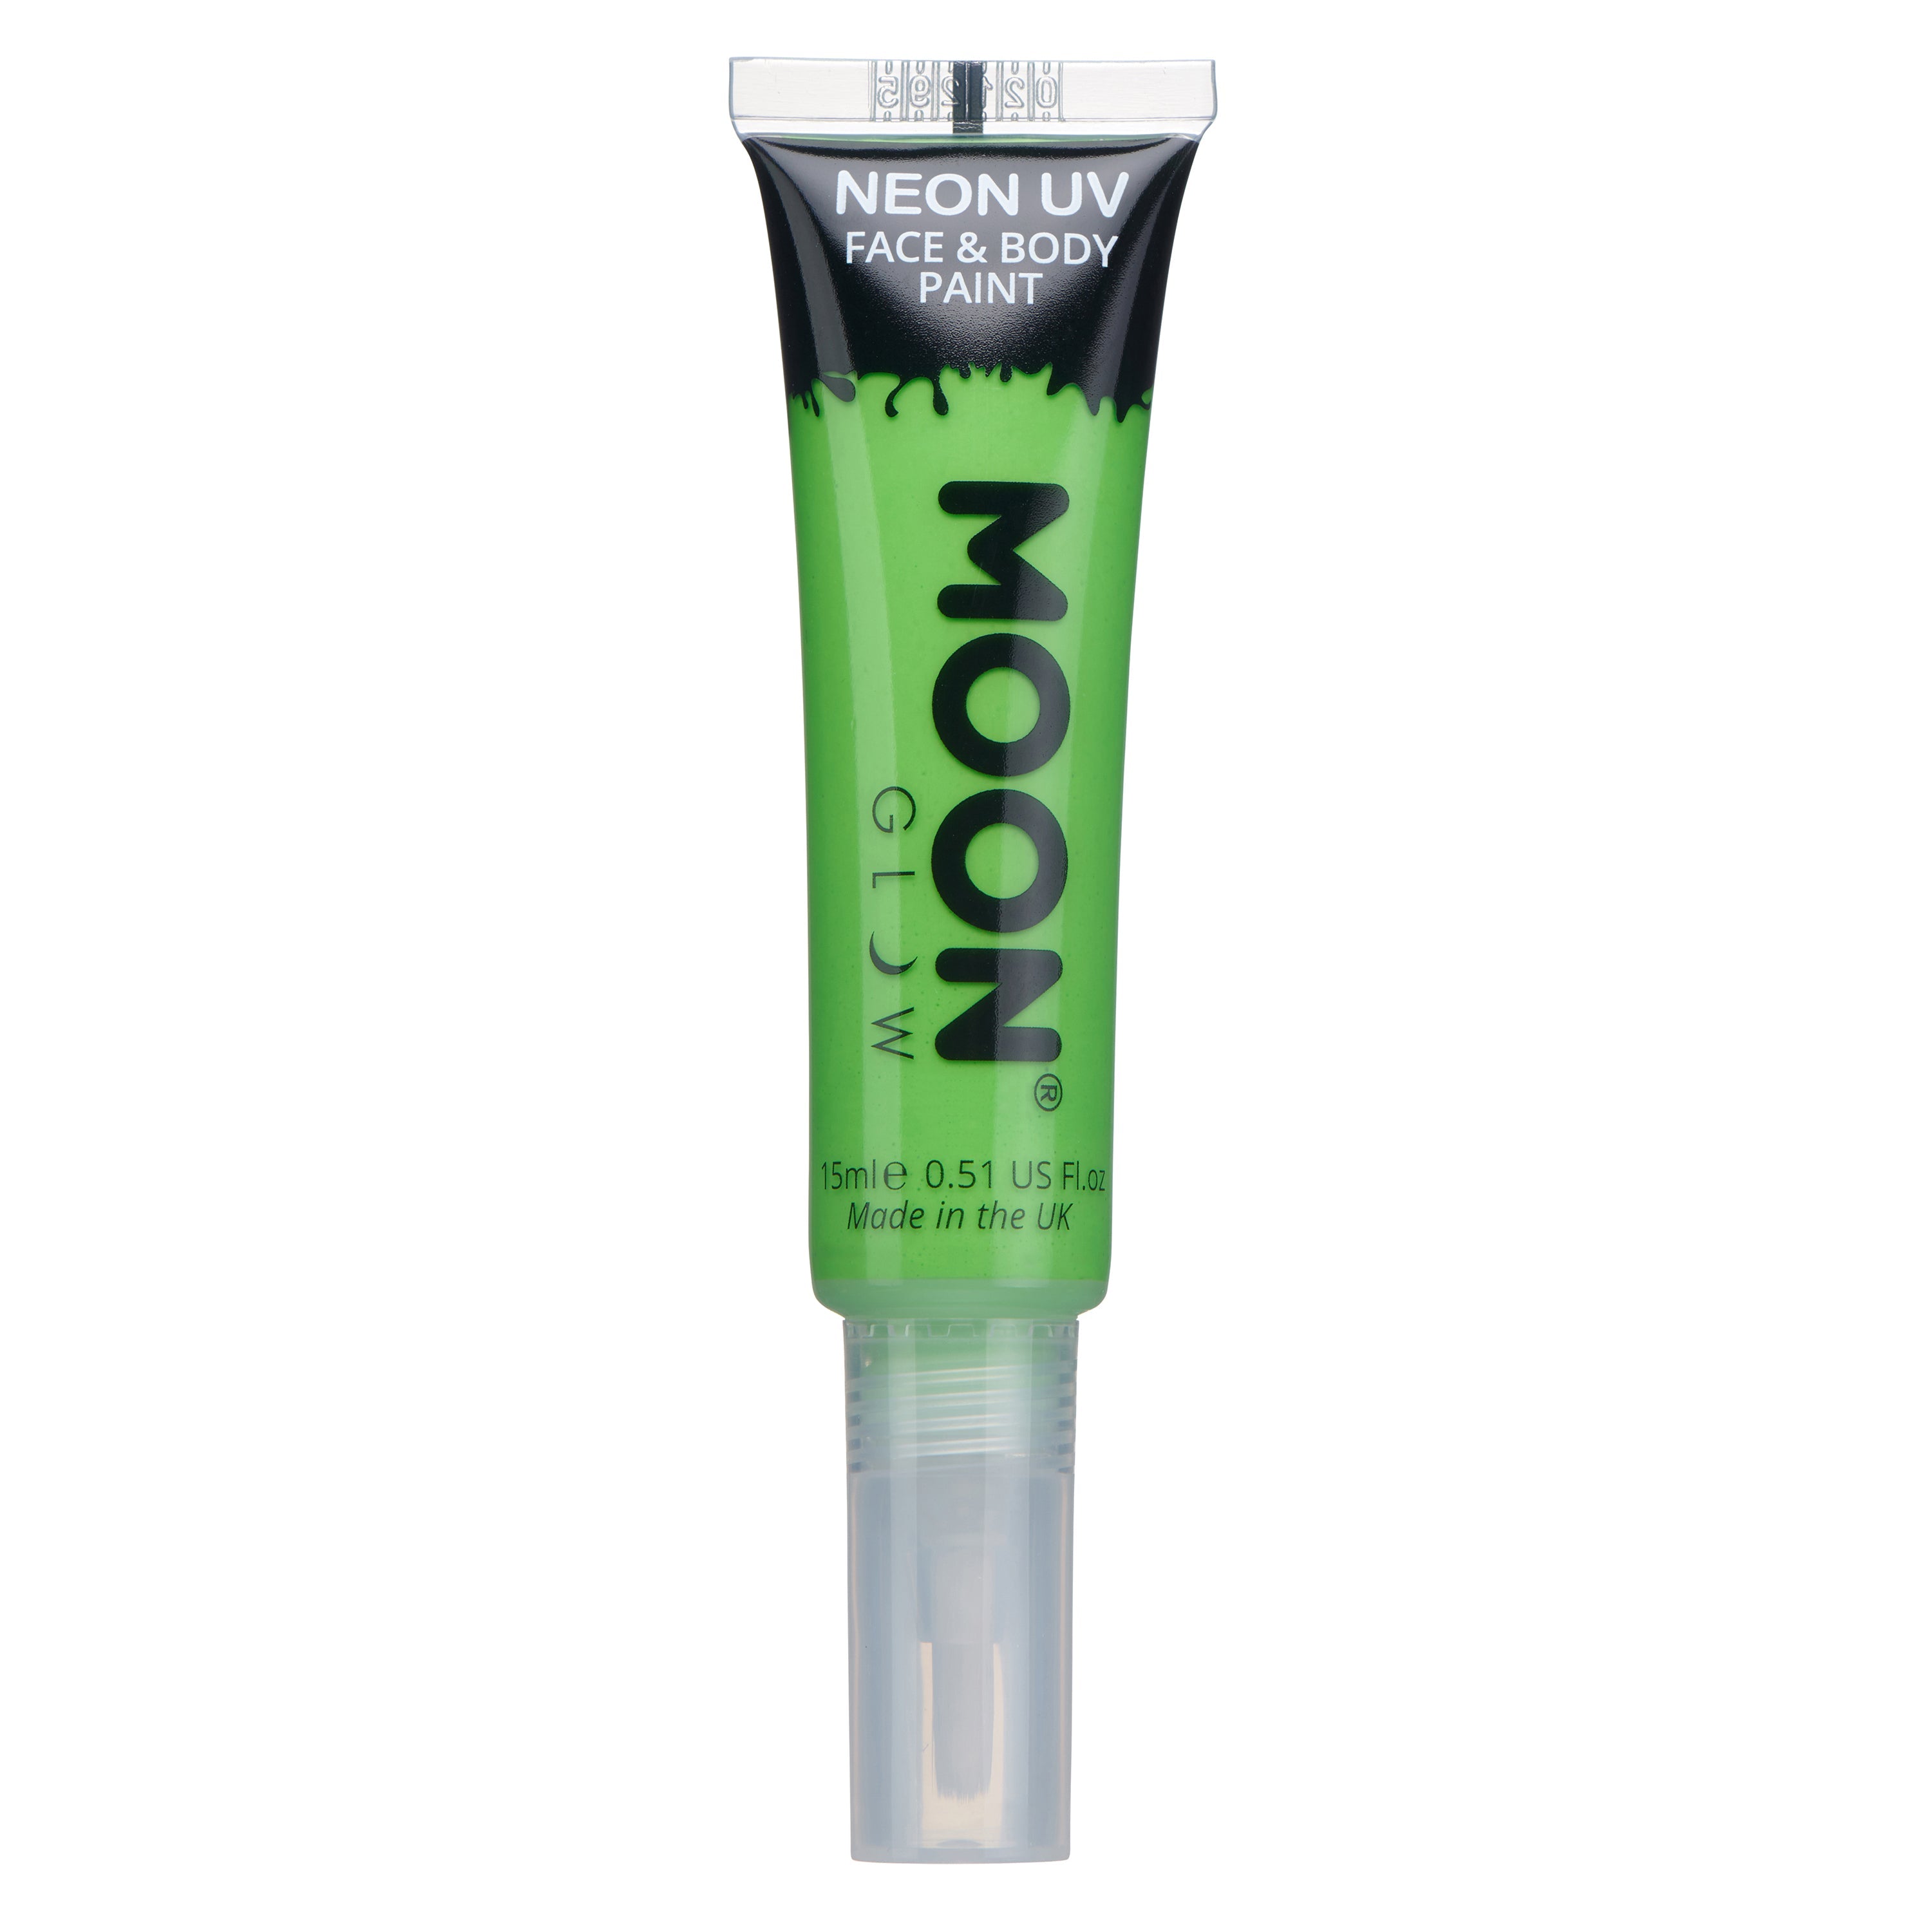 Intense Green - Neon UV Glow Blacklight Face & Body Paint Makeup w/Brush, 15mL. Cosmetically certified, FDA & Health Canada compliant, cruelty free and vegan.